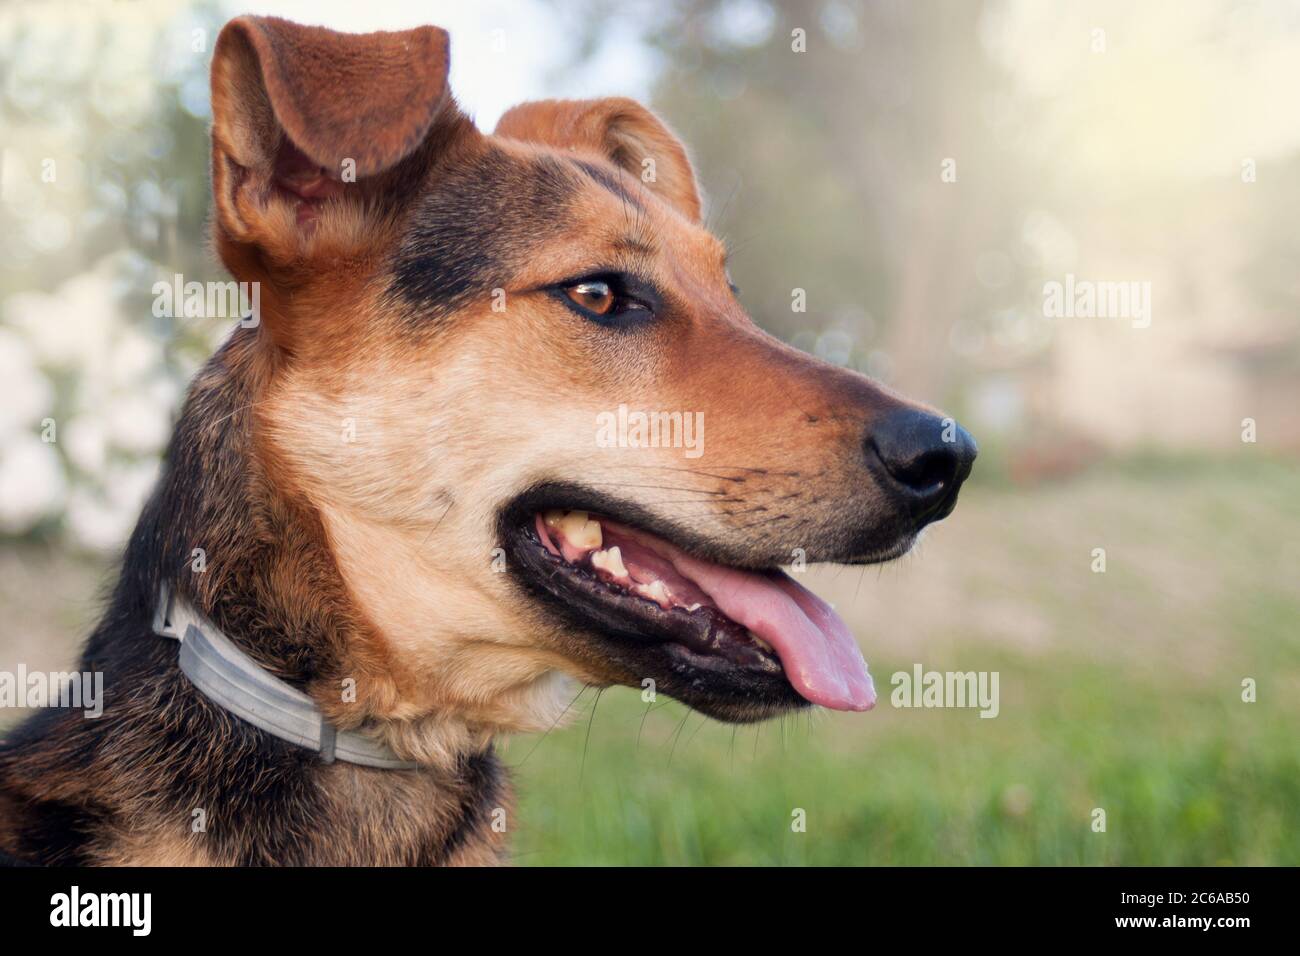 close up of a dog's face with a black beautiful nose. shining golden eyes. looking far. outdoor.Animal head close up shot. Stock Photo